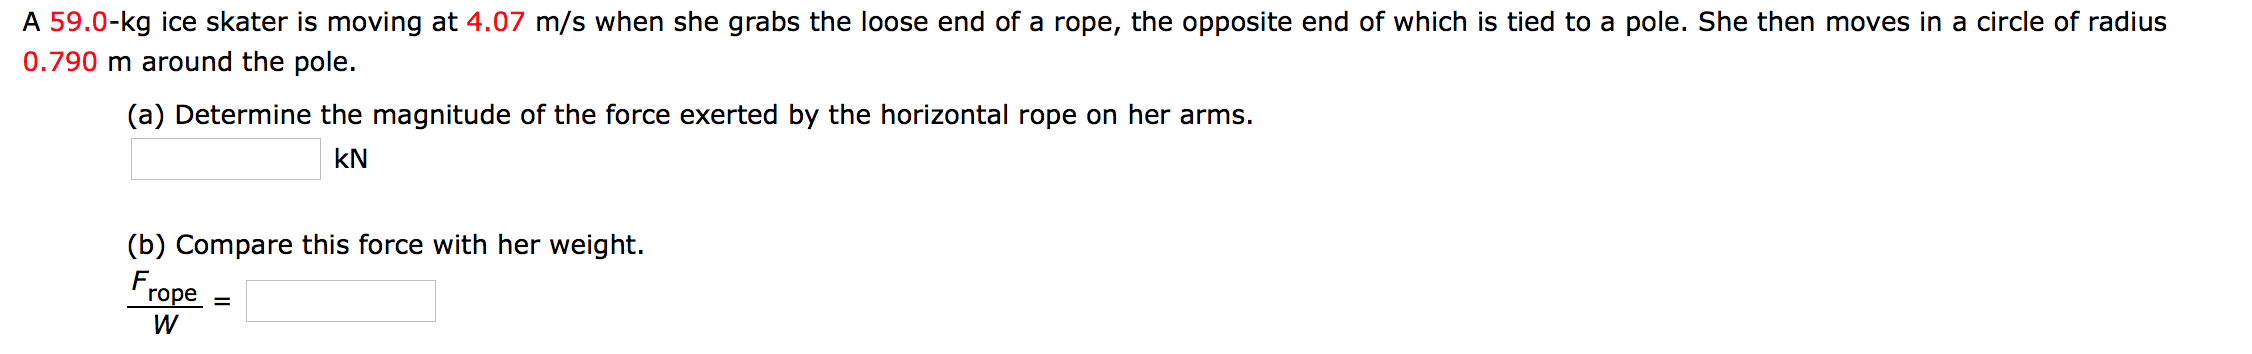 A 59.0-kg ice skater is moving at 4.07 m/s when she grabs the loose end of a rope, the opposite end of which is tied to a pole. She then moves in a circle of radius
0.790 m around the pole.
(a) Determine the magnitude of the force exerted by the horizontal rope on her arms.
kN
(b) Compare this force with her weight.
Frope =
W
